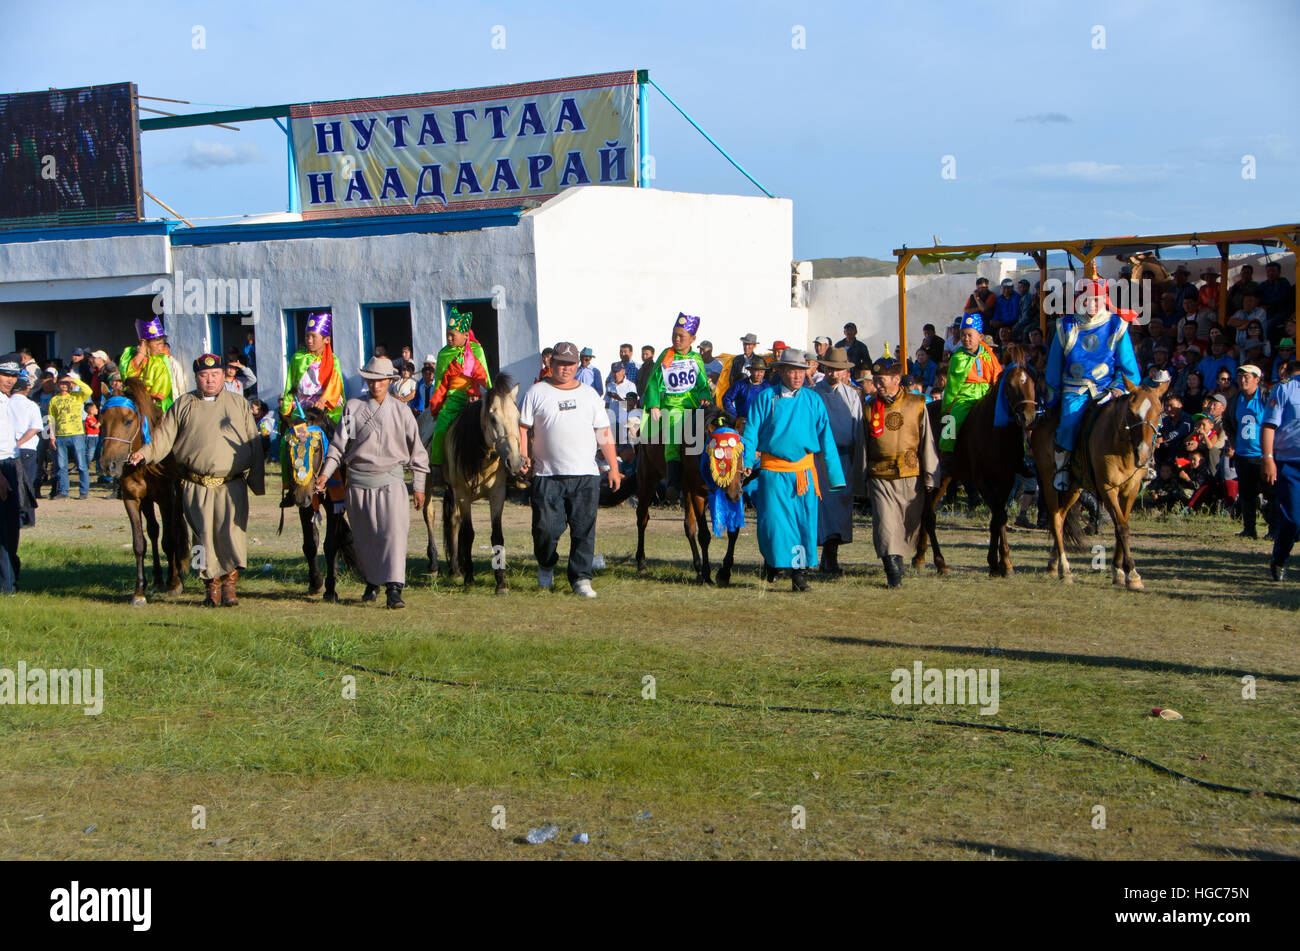 The winners of horse racing are in line for trophy. Stock Photo